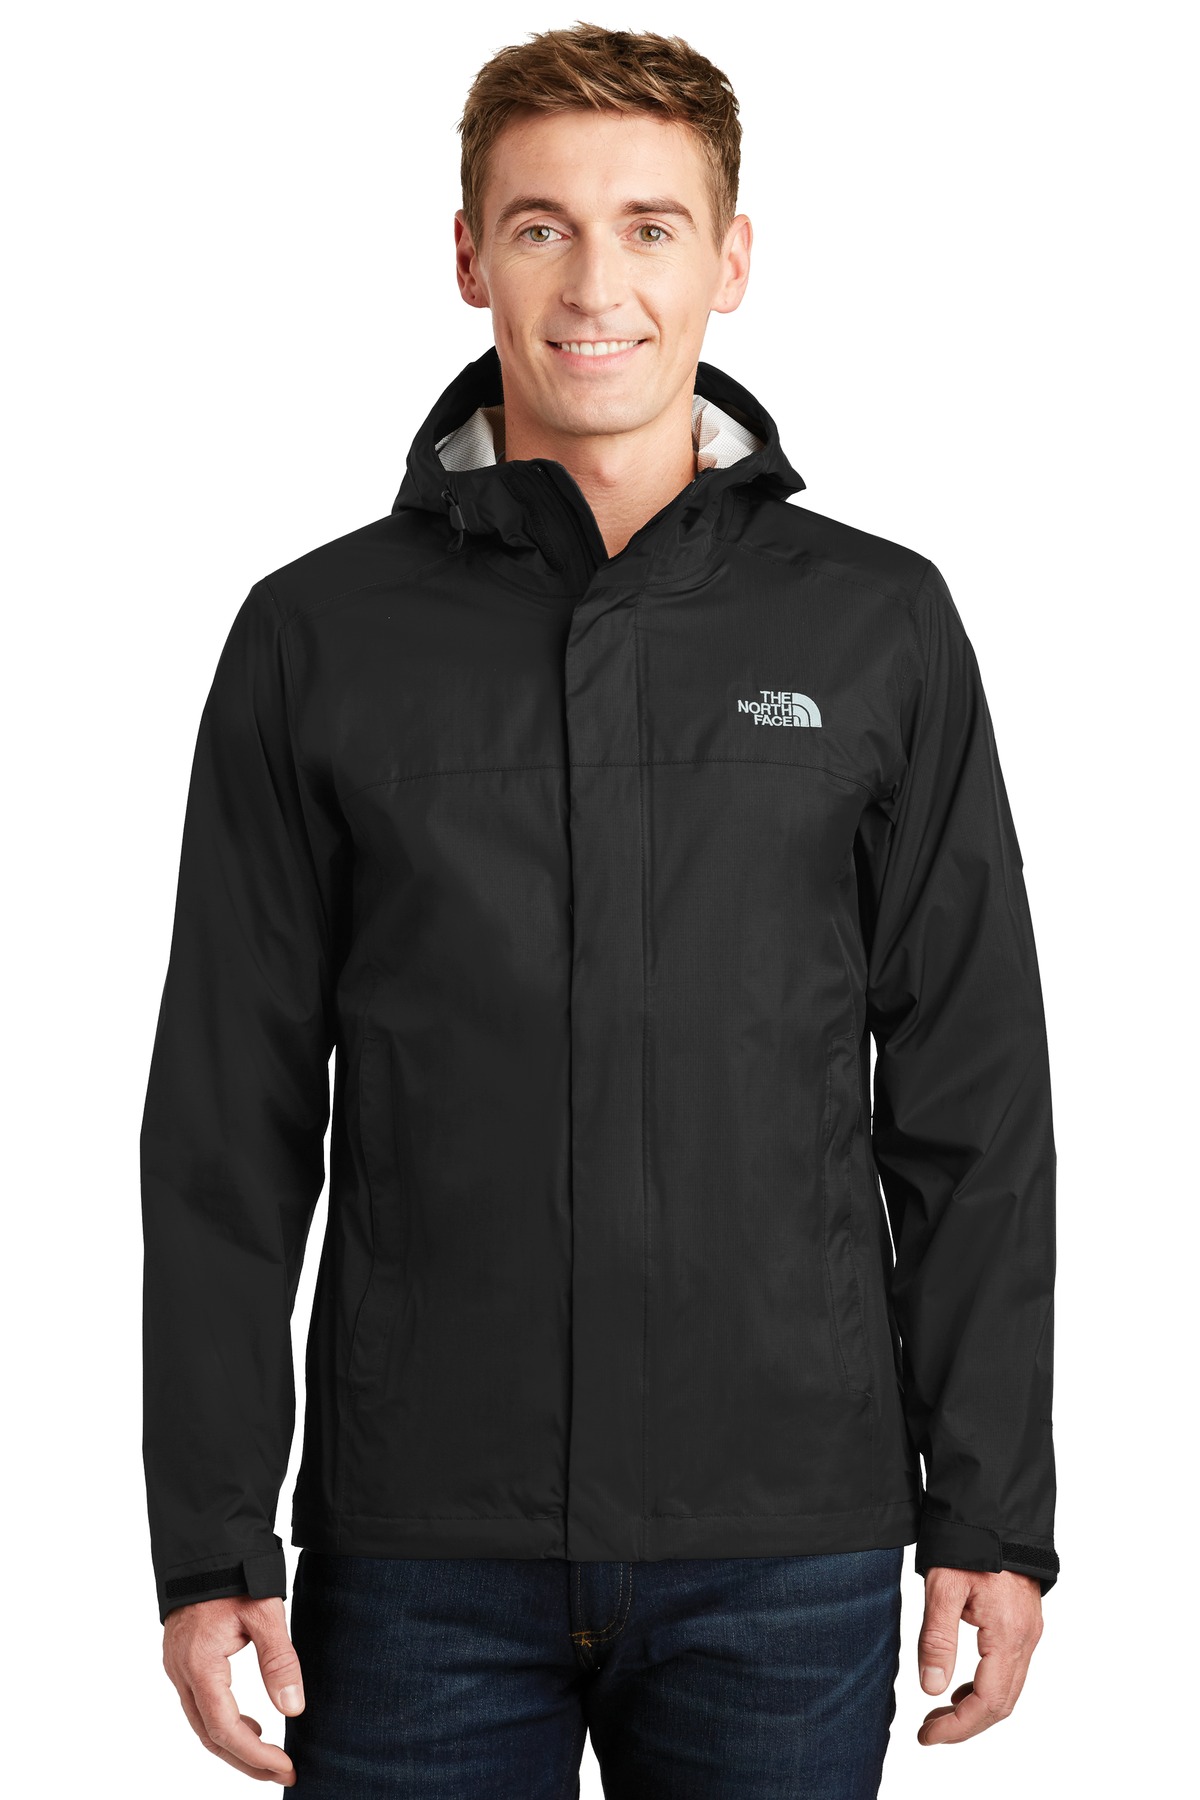 The North Face Outerwear for Corporate & Hospitality ® DryVent Rain Jacket.-The North Face